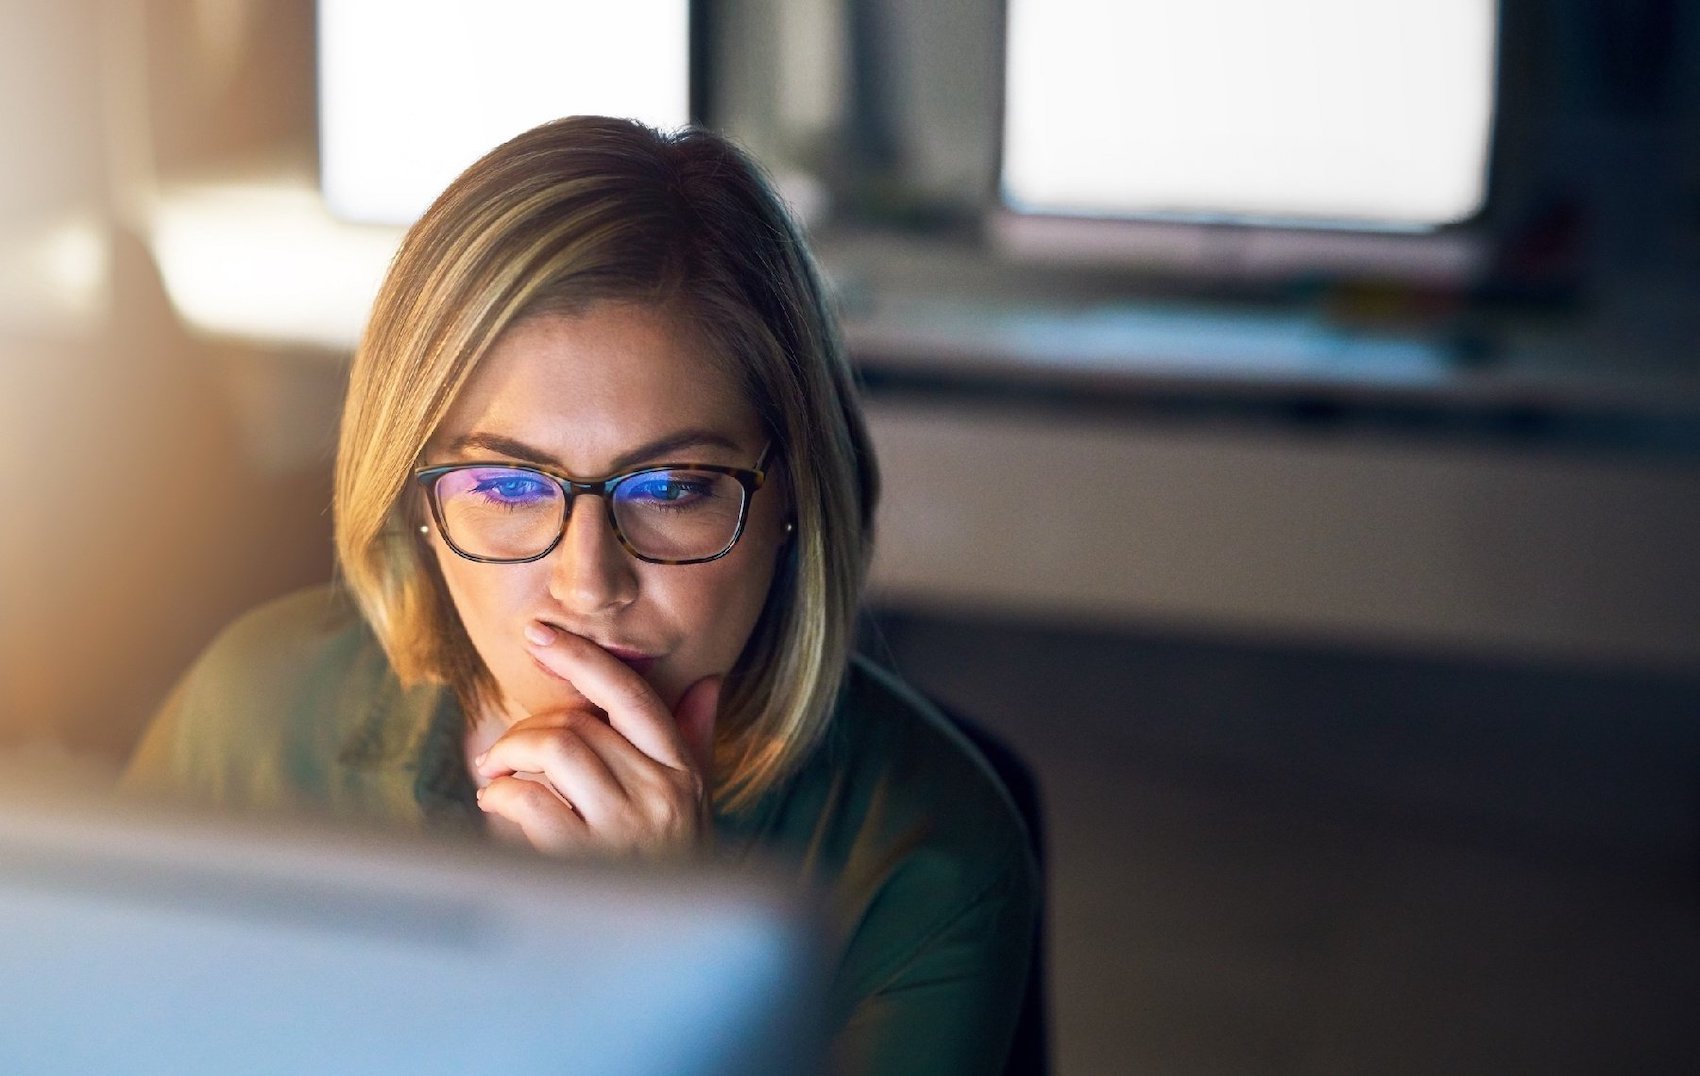 woman with glasses on looking intently at computer screen reviewing email security looking right-2